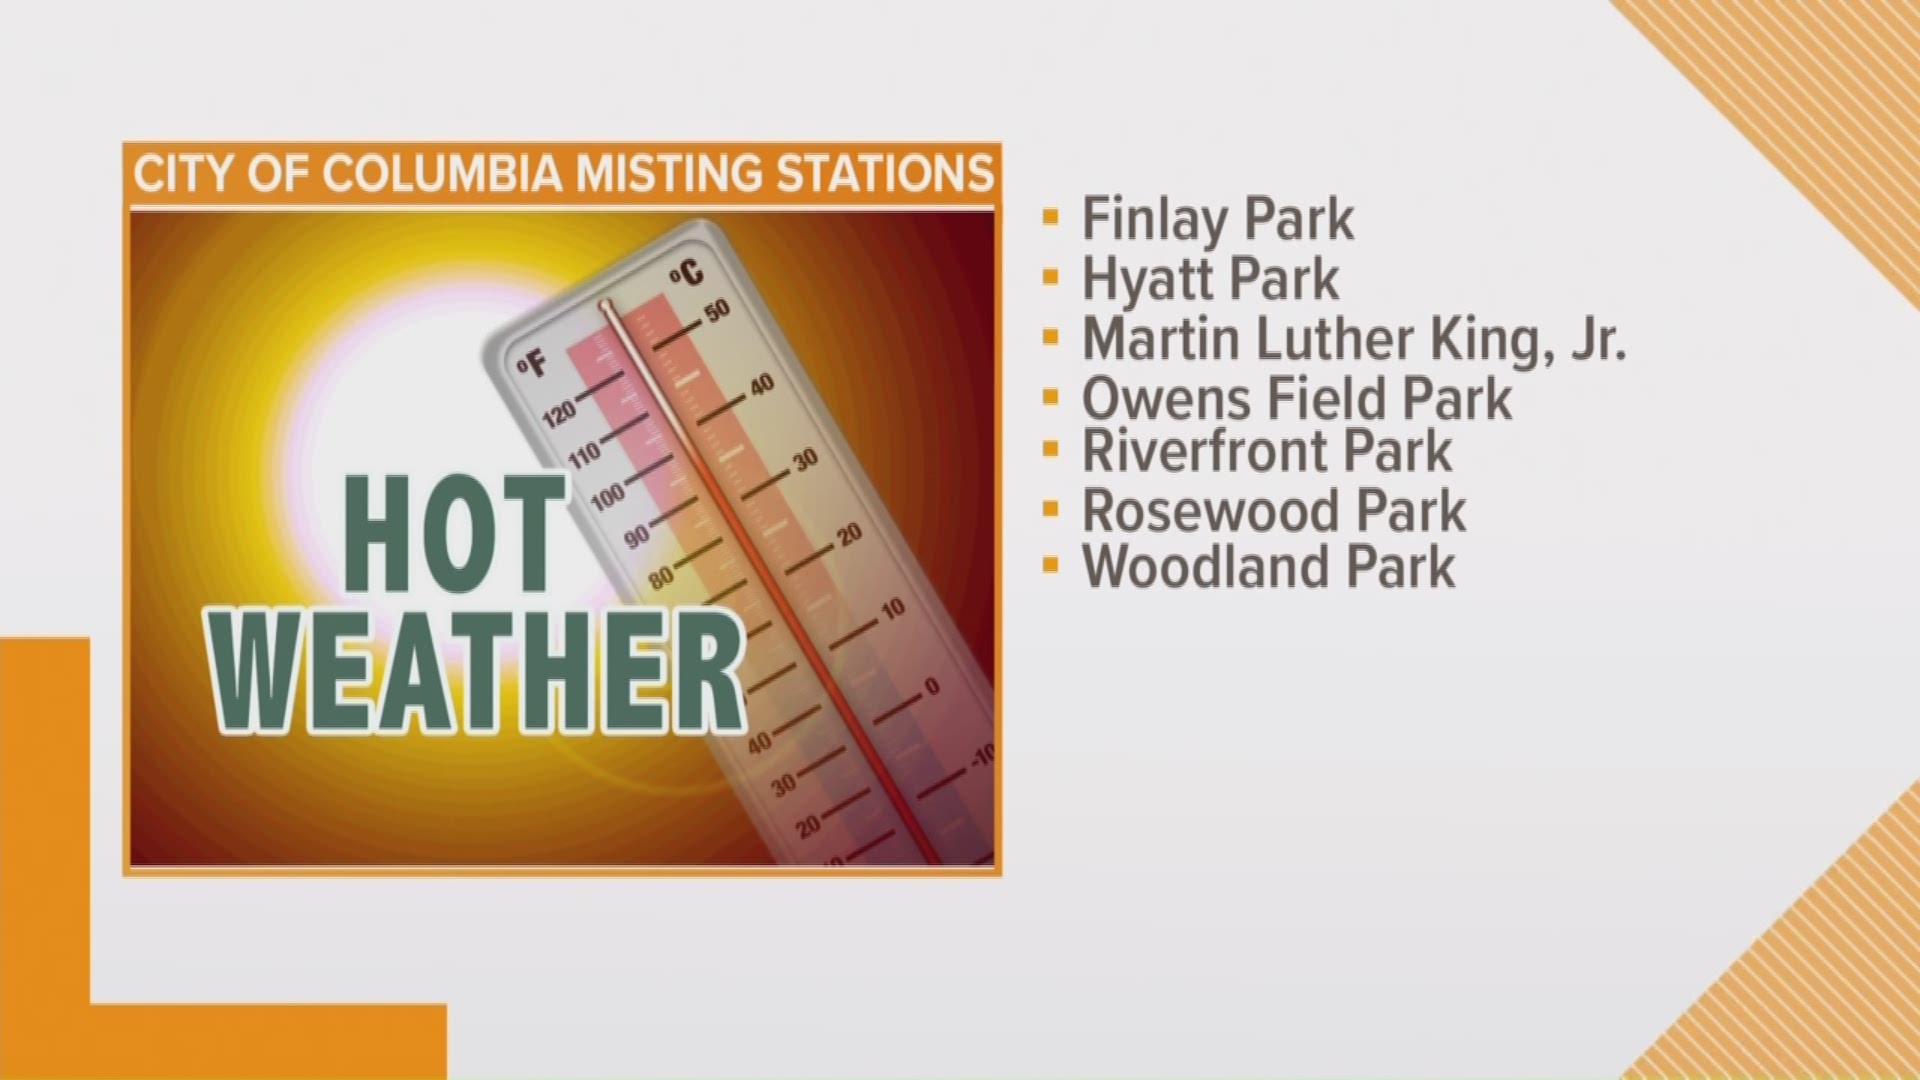 To help residents beat the heat, the City of Columbia is operating misting stations, swimming pools, splash pads and spray pools throughout the city.